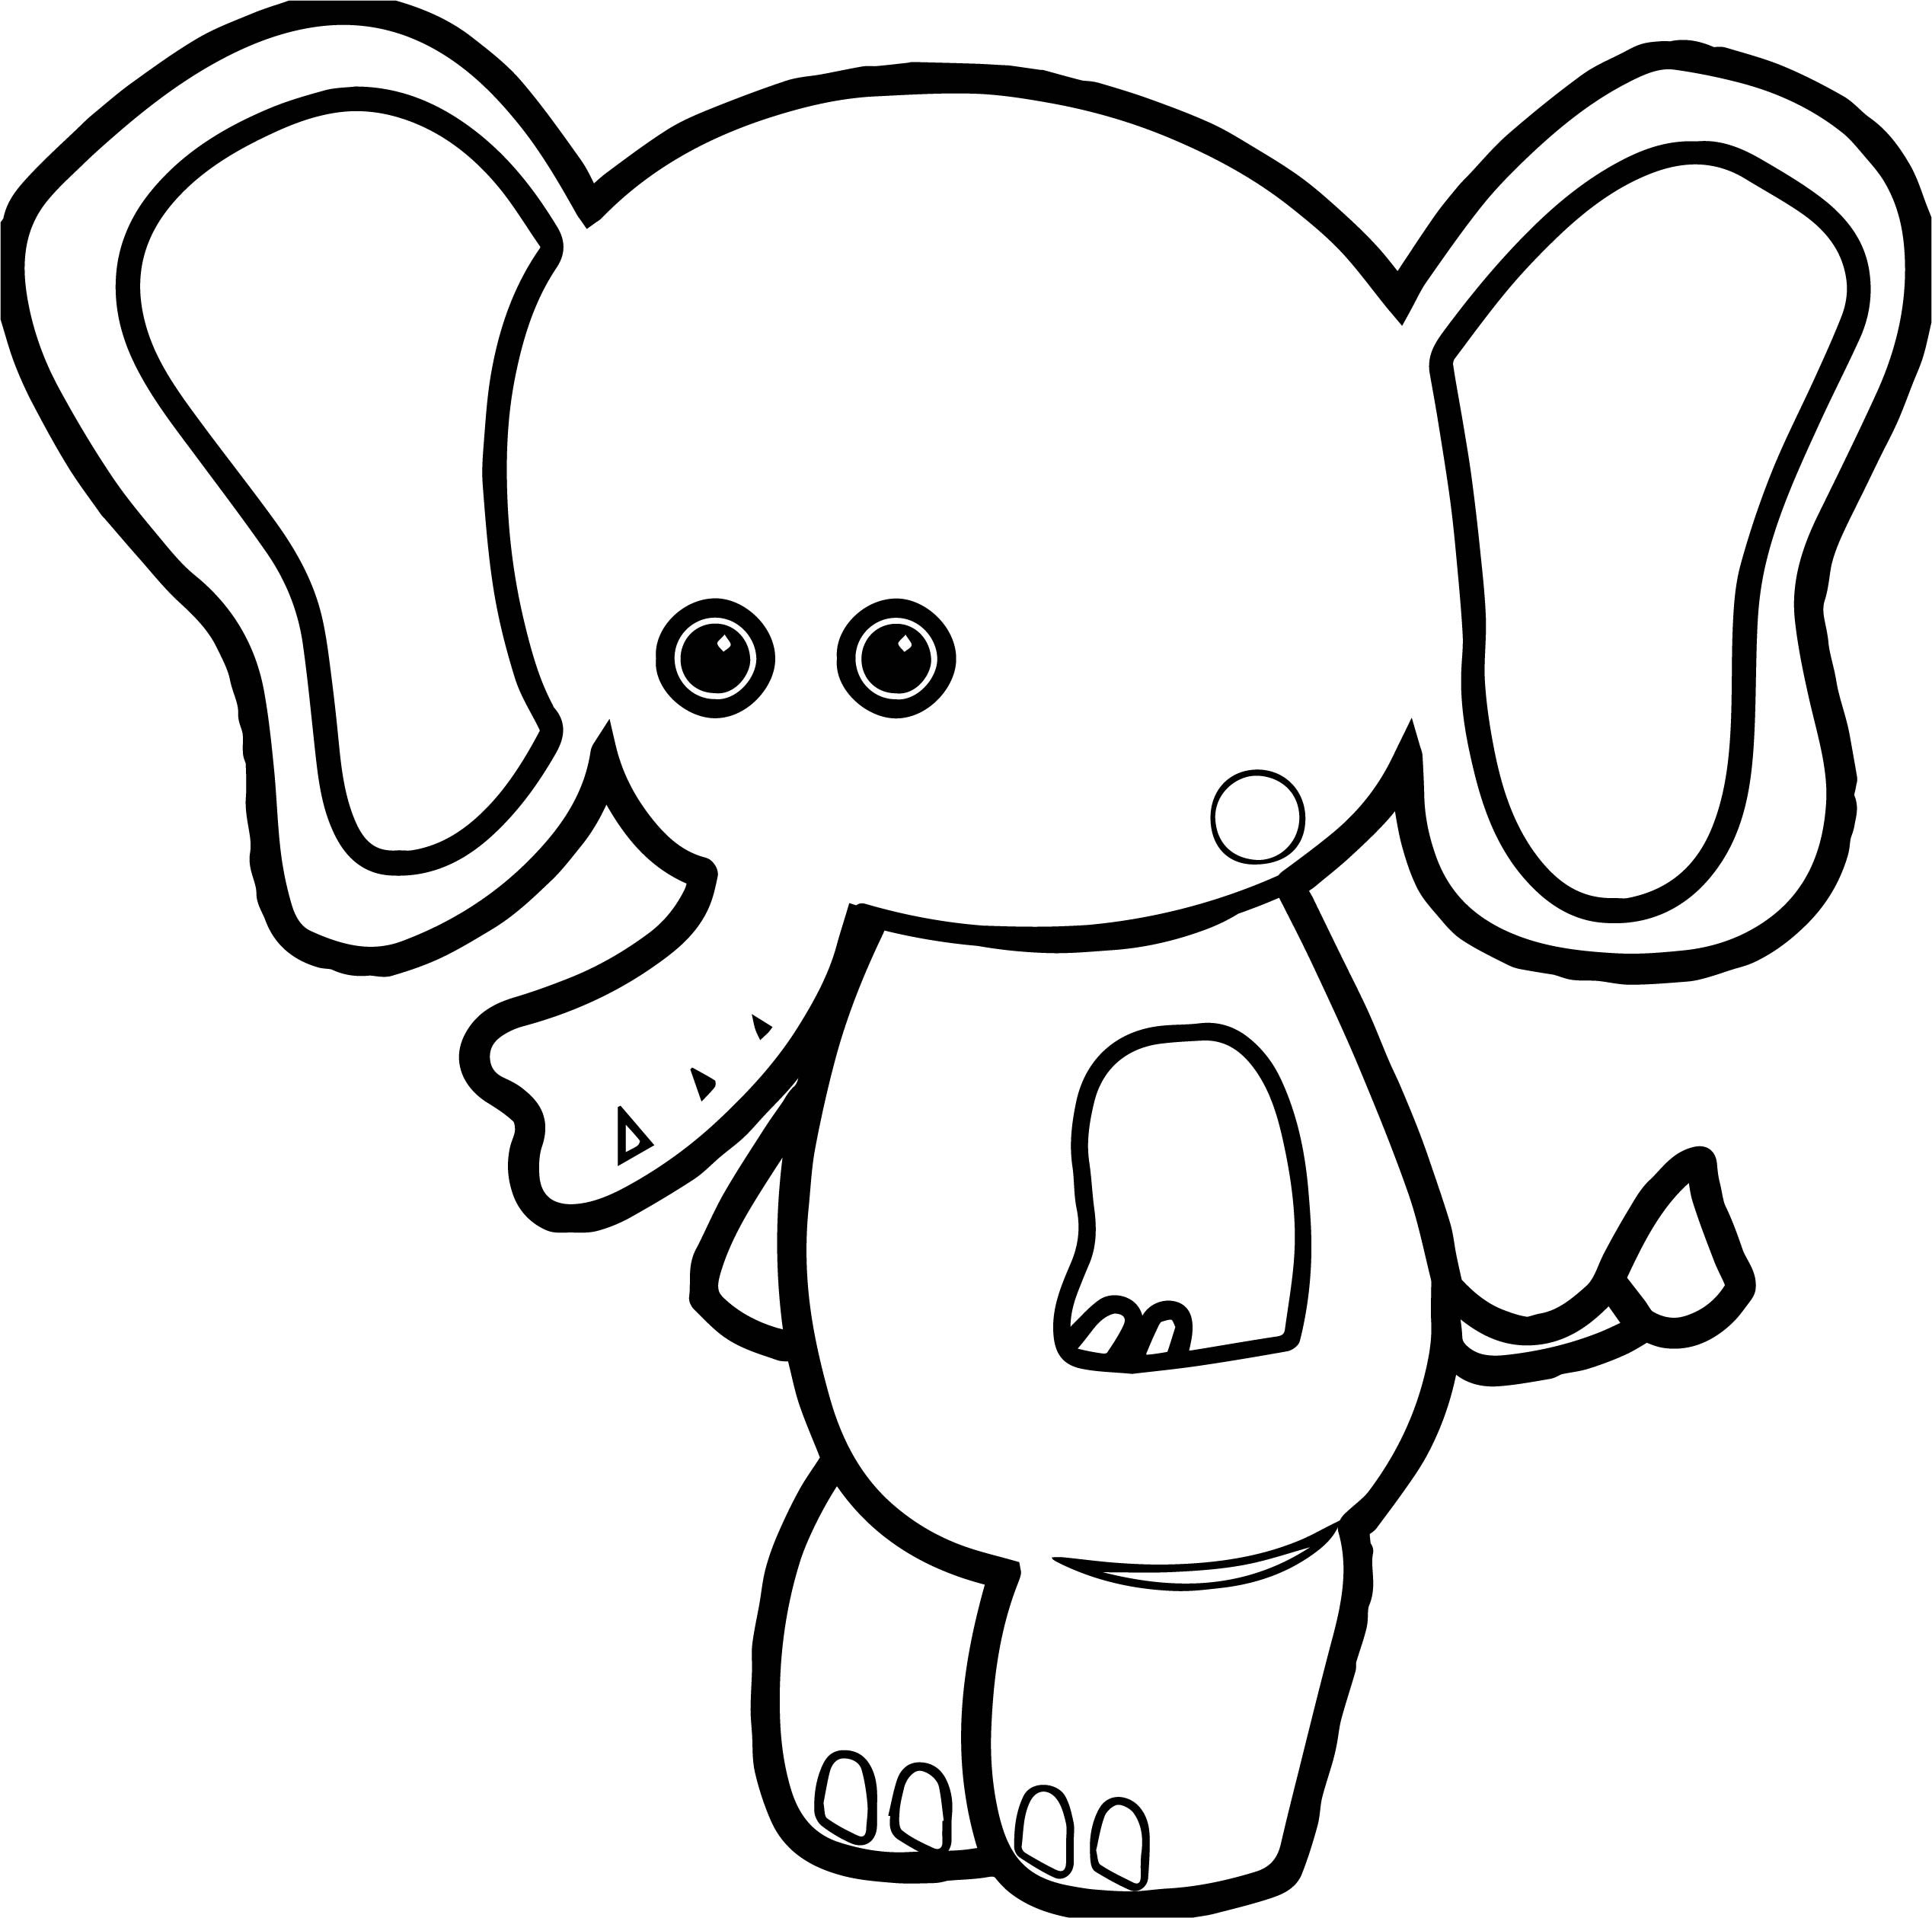 Baby Farm Animals Coloring Pages
 Baby Farm Animal Elephant Coloring Page